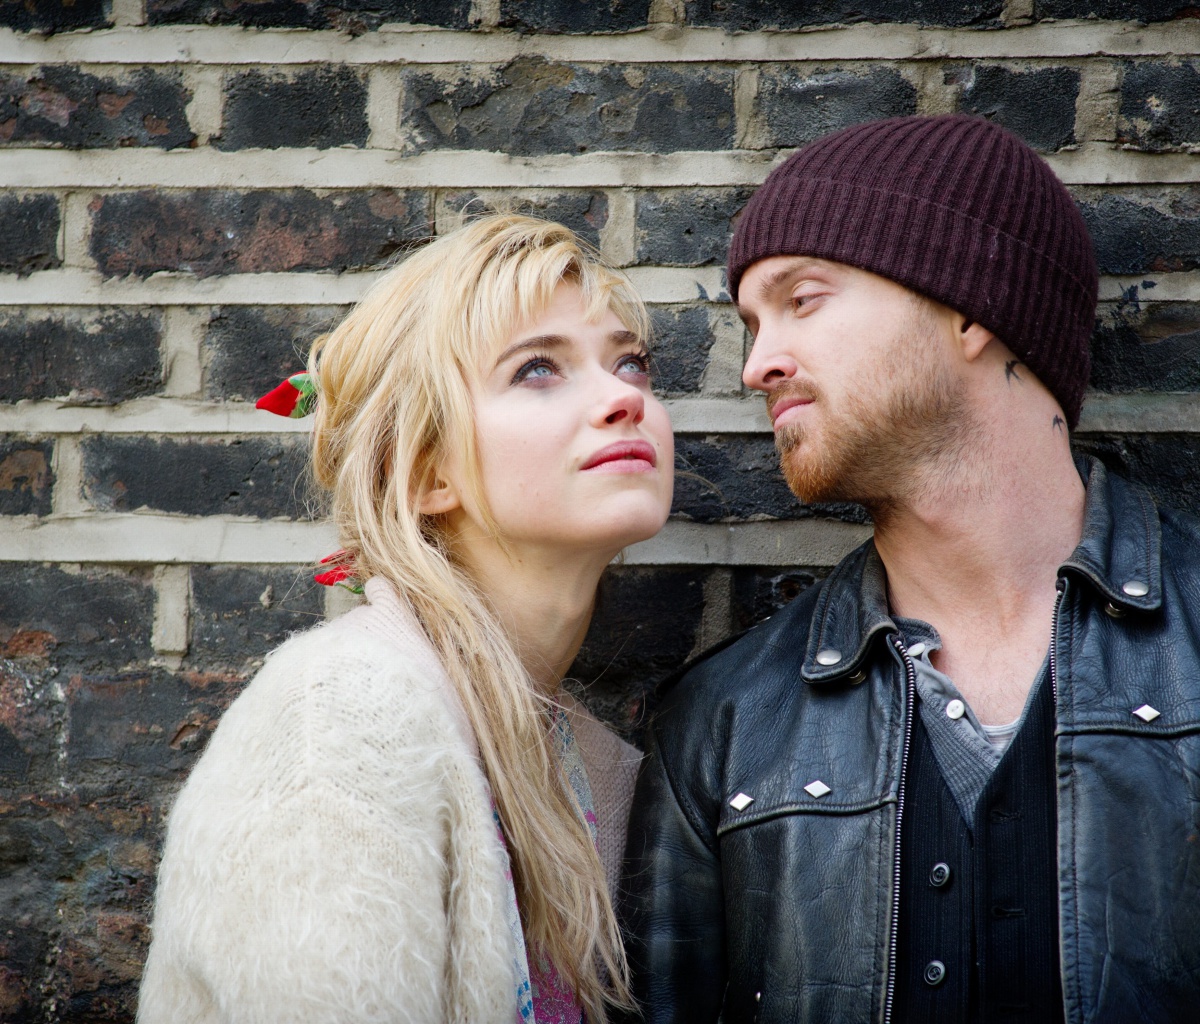 Das A Long Way Down with Aaron Paul and Imogen Poots Wallpaper 1200x1024